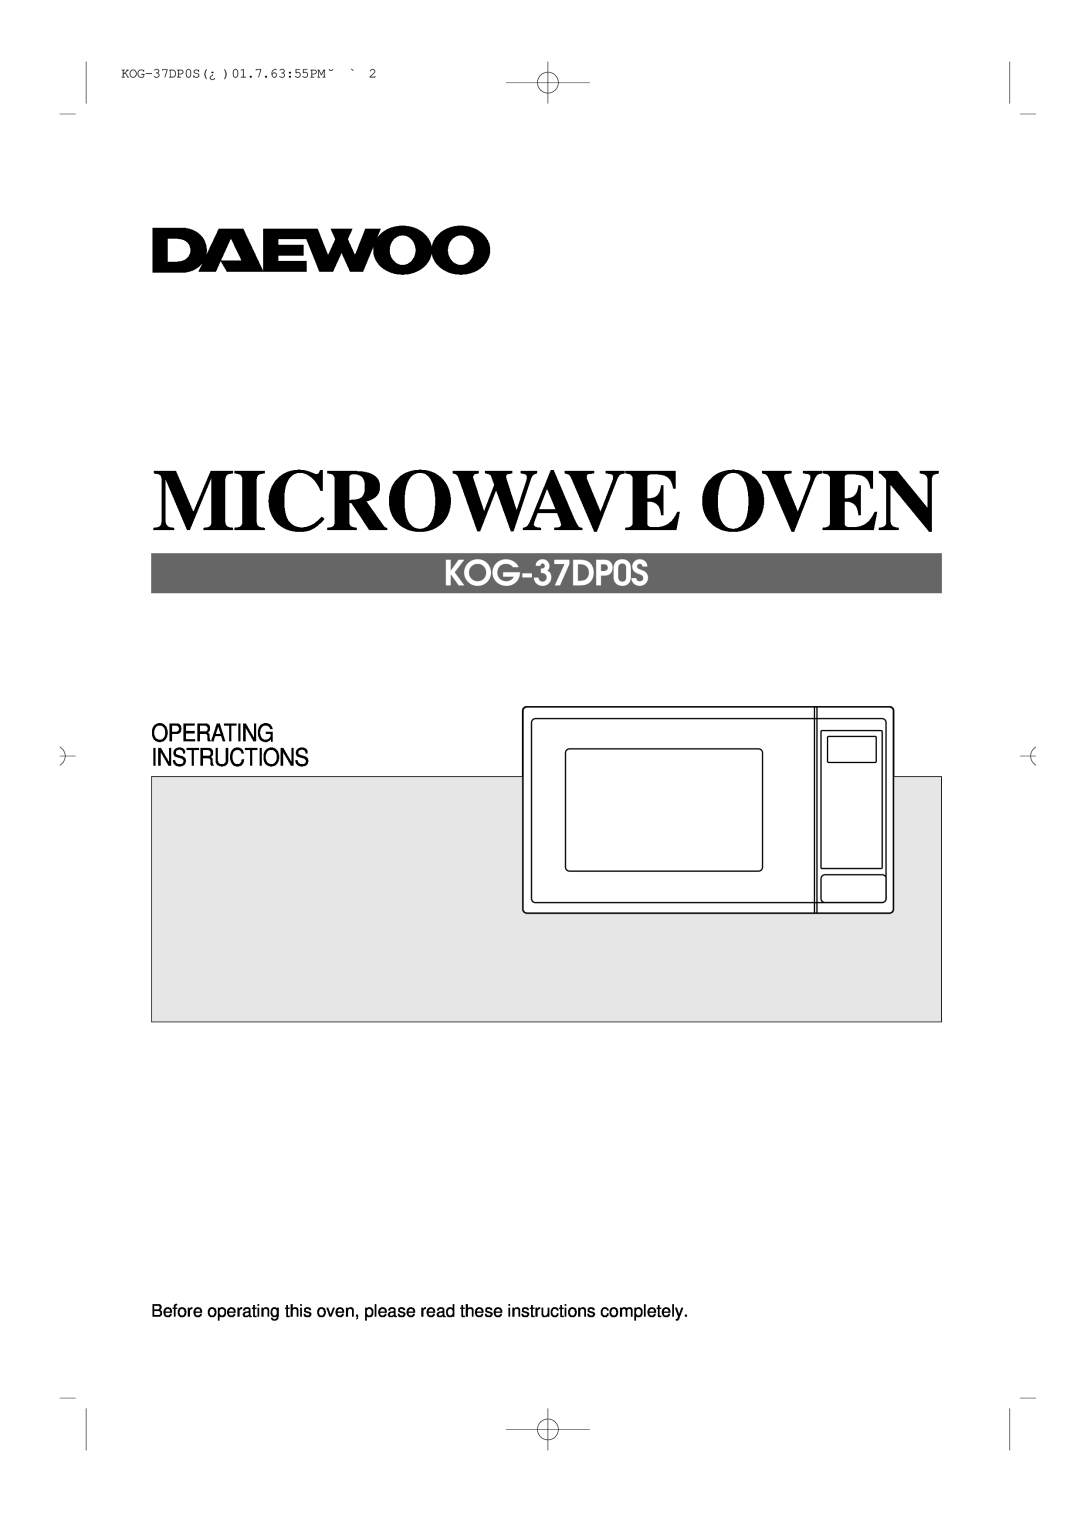 Daewoo manual Microwave Oven, Operating Instructions, KOG-37DP0S¿01.7.63 55PM˘ ` 